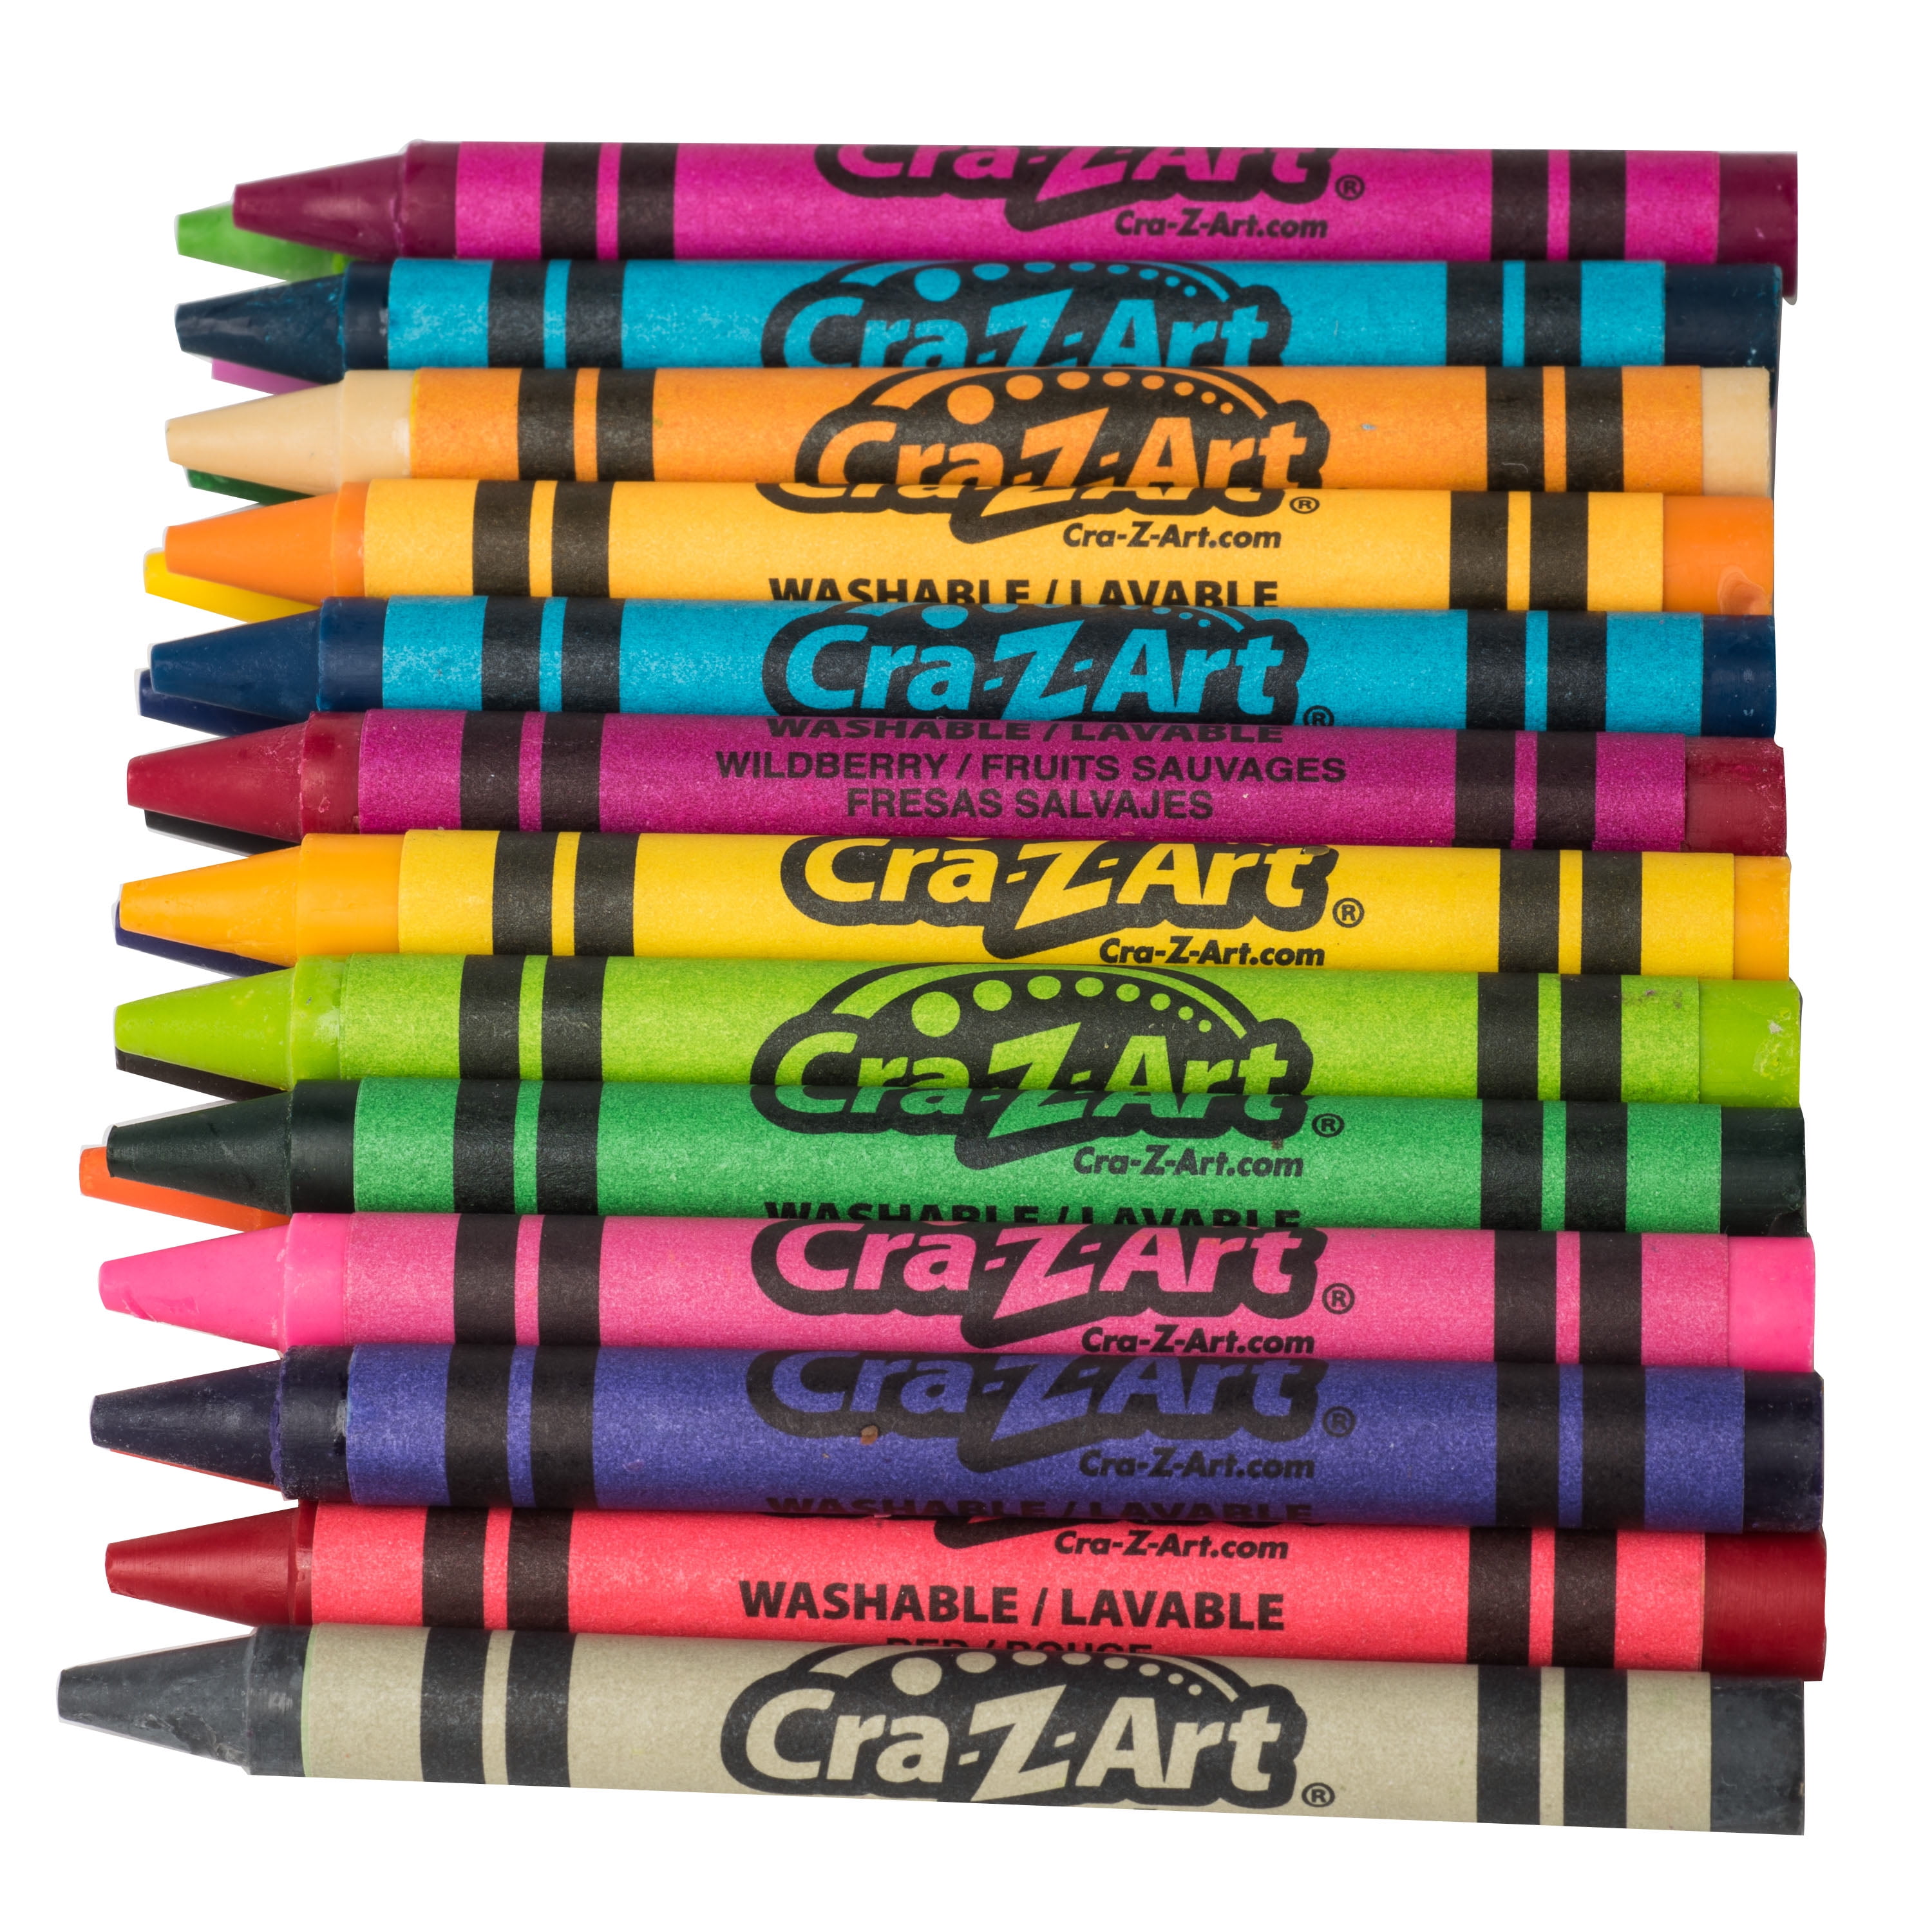 Crayola Crayons 24 count – Art Therapy